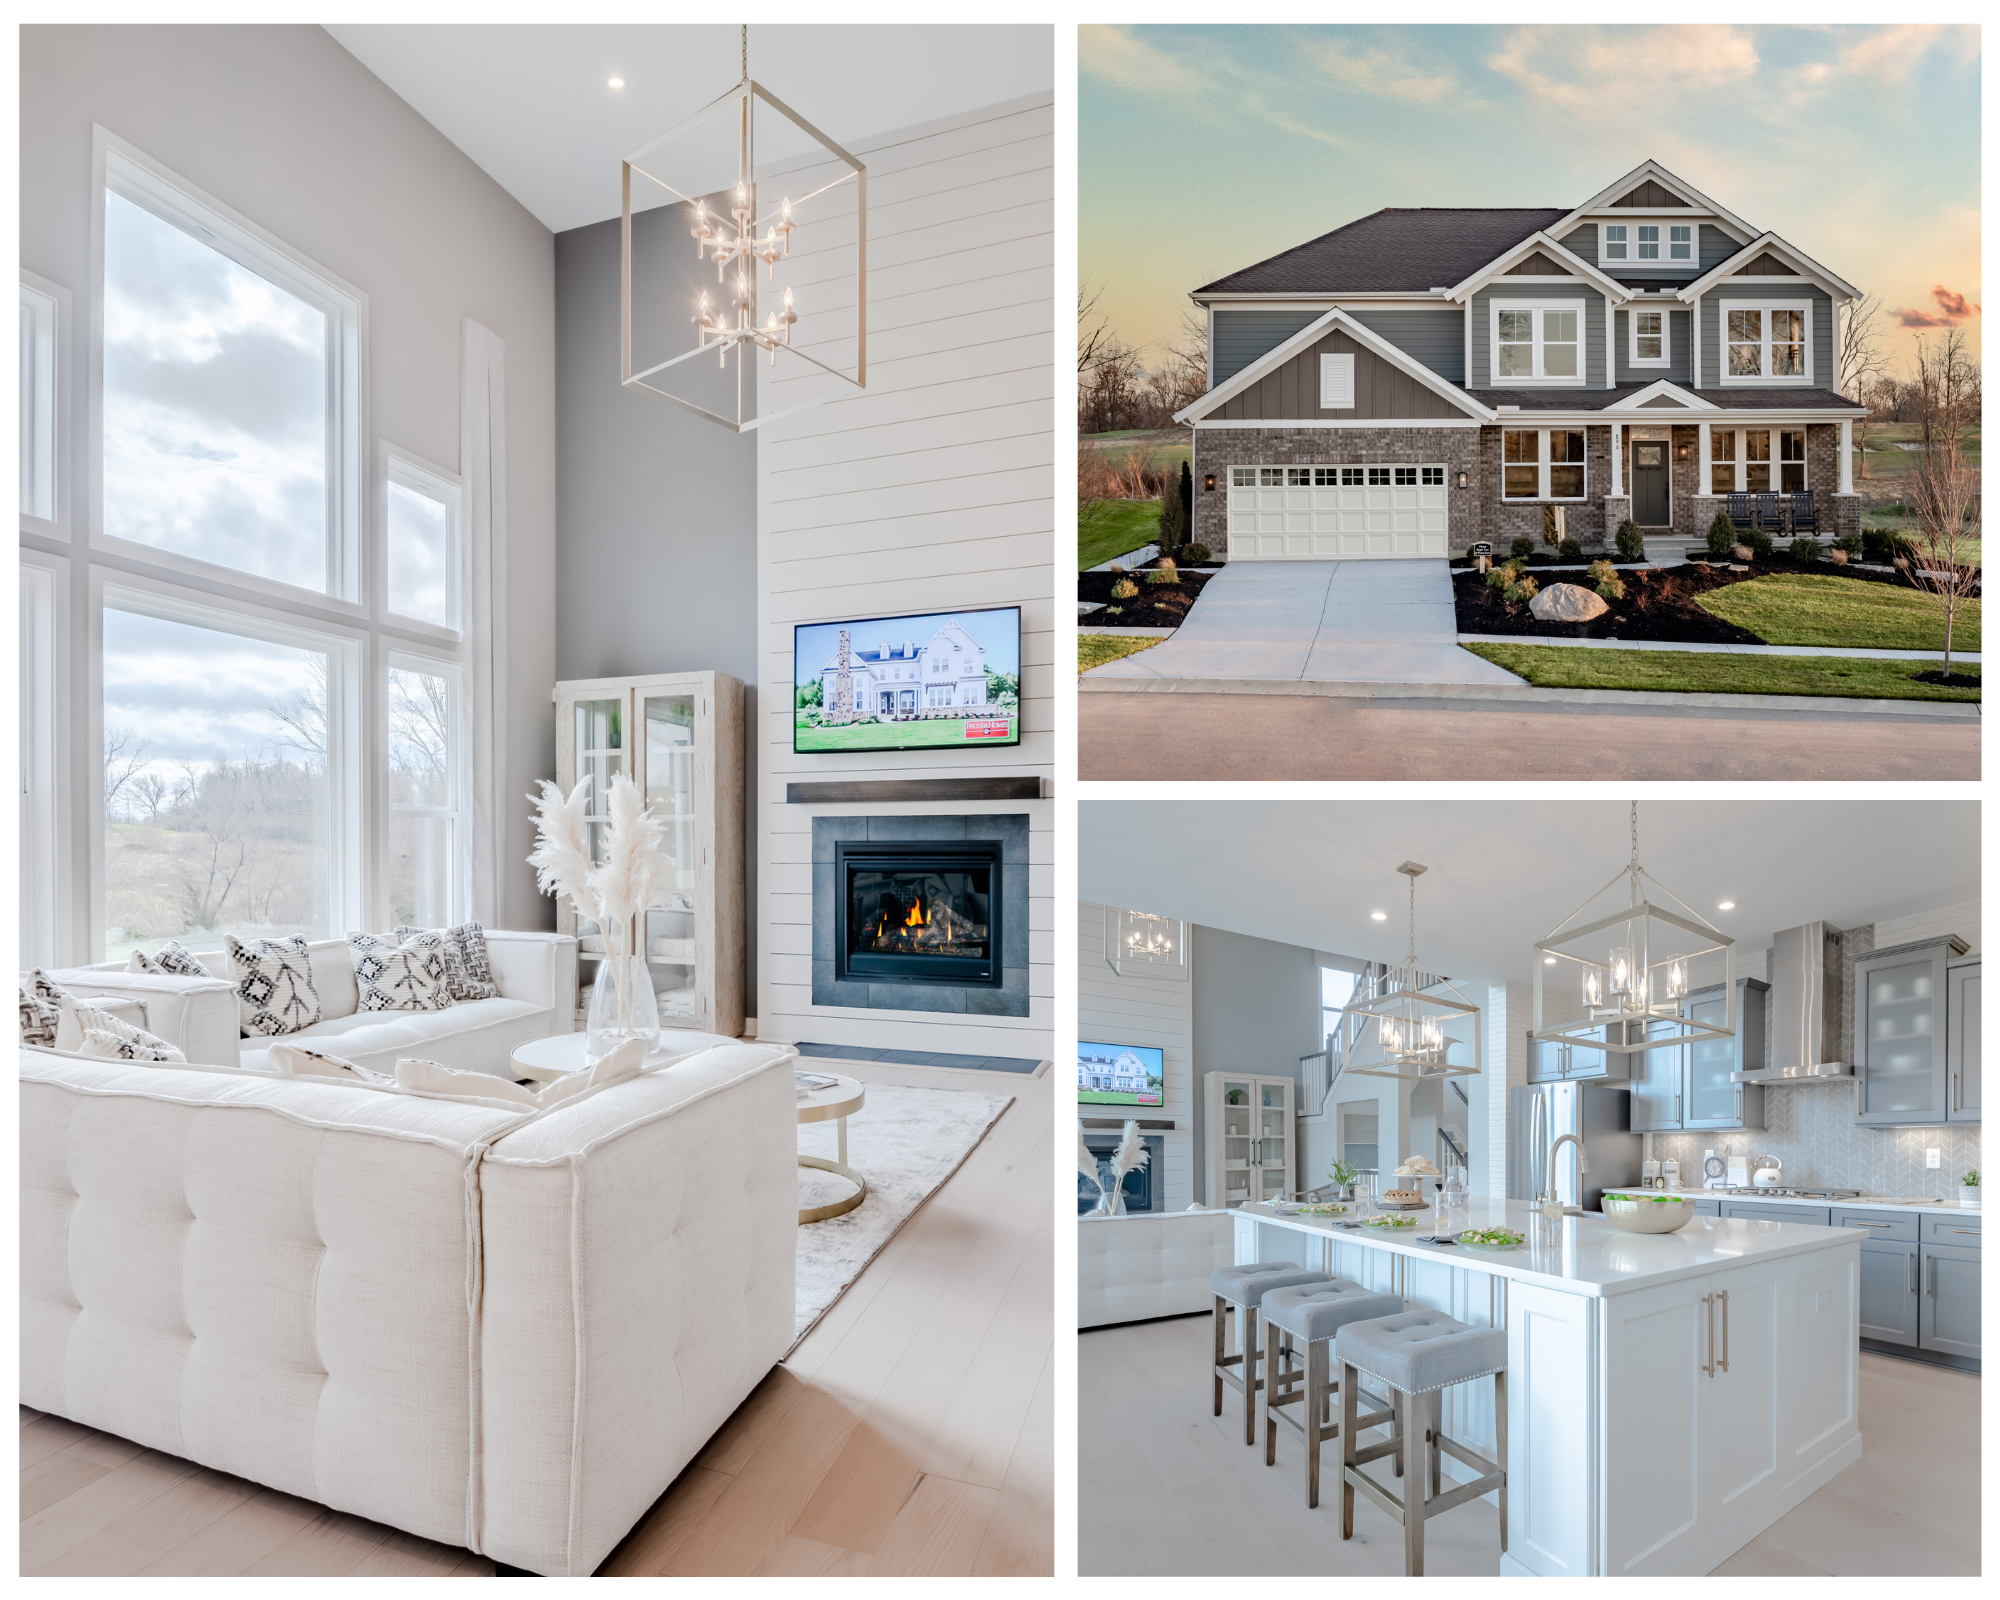 We still have plenty of opportunities to build in the Greater Cincinnati area, visit one of our models to speak to a Sales Counselor to find out what community and floorplan fit your needs best.